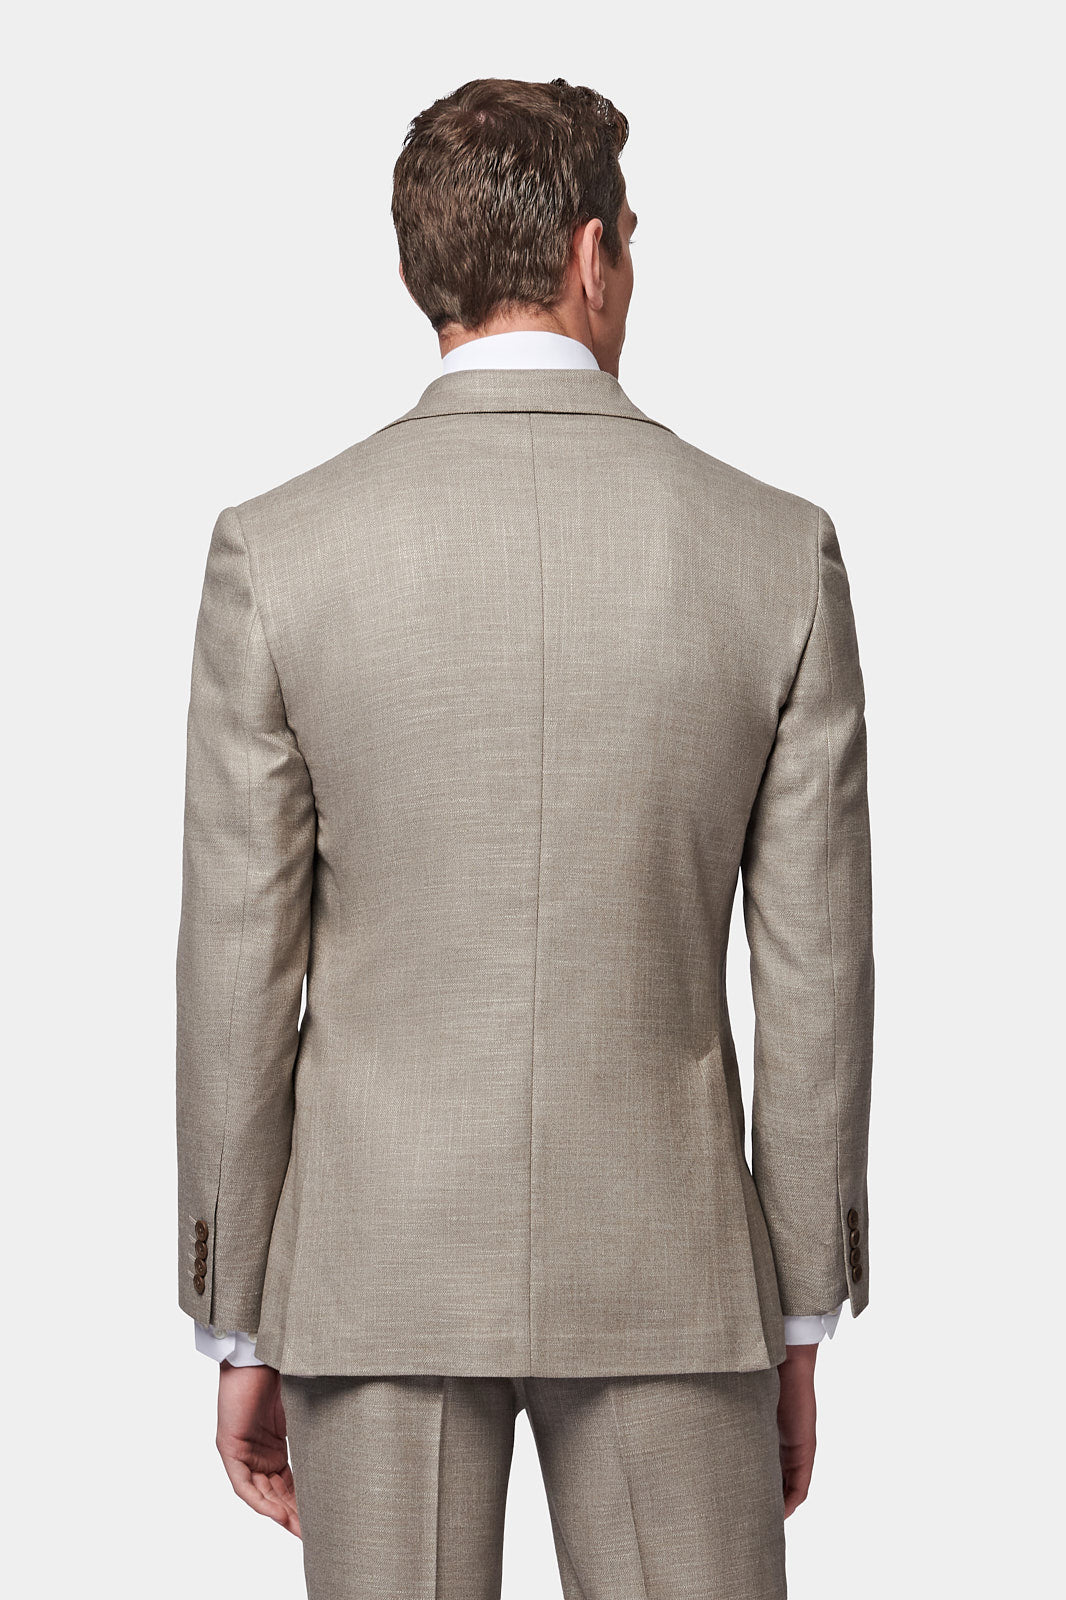 Linen Contemporary Notched Lapel Suit in Taupe